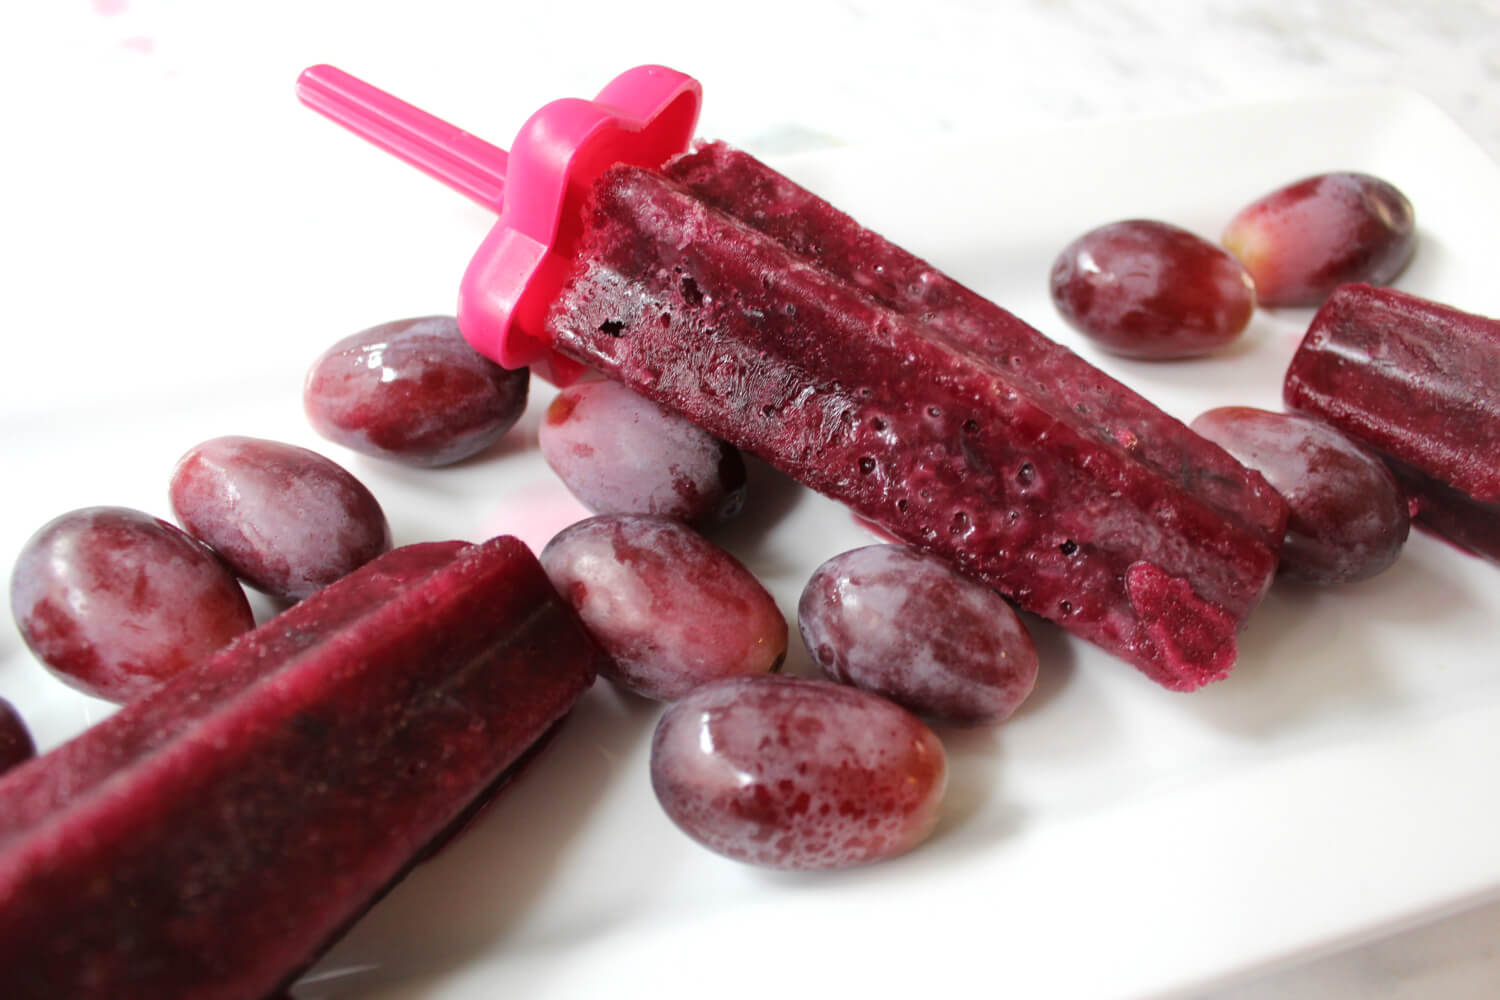 How to Make the Best Popsicles at Home (without the sugar!)